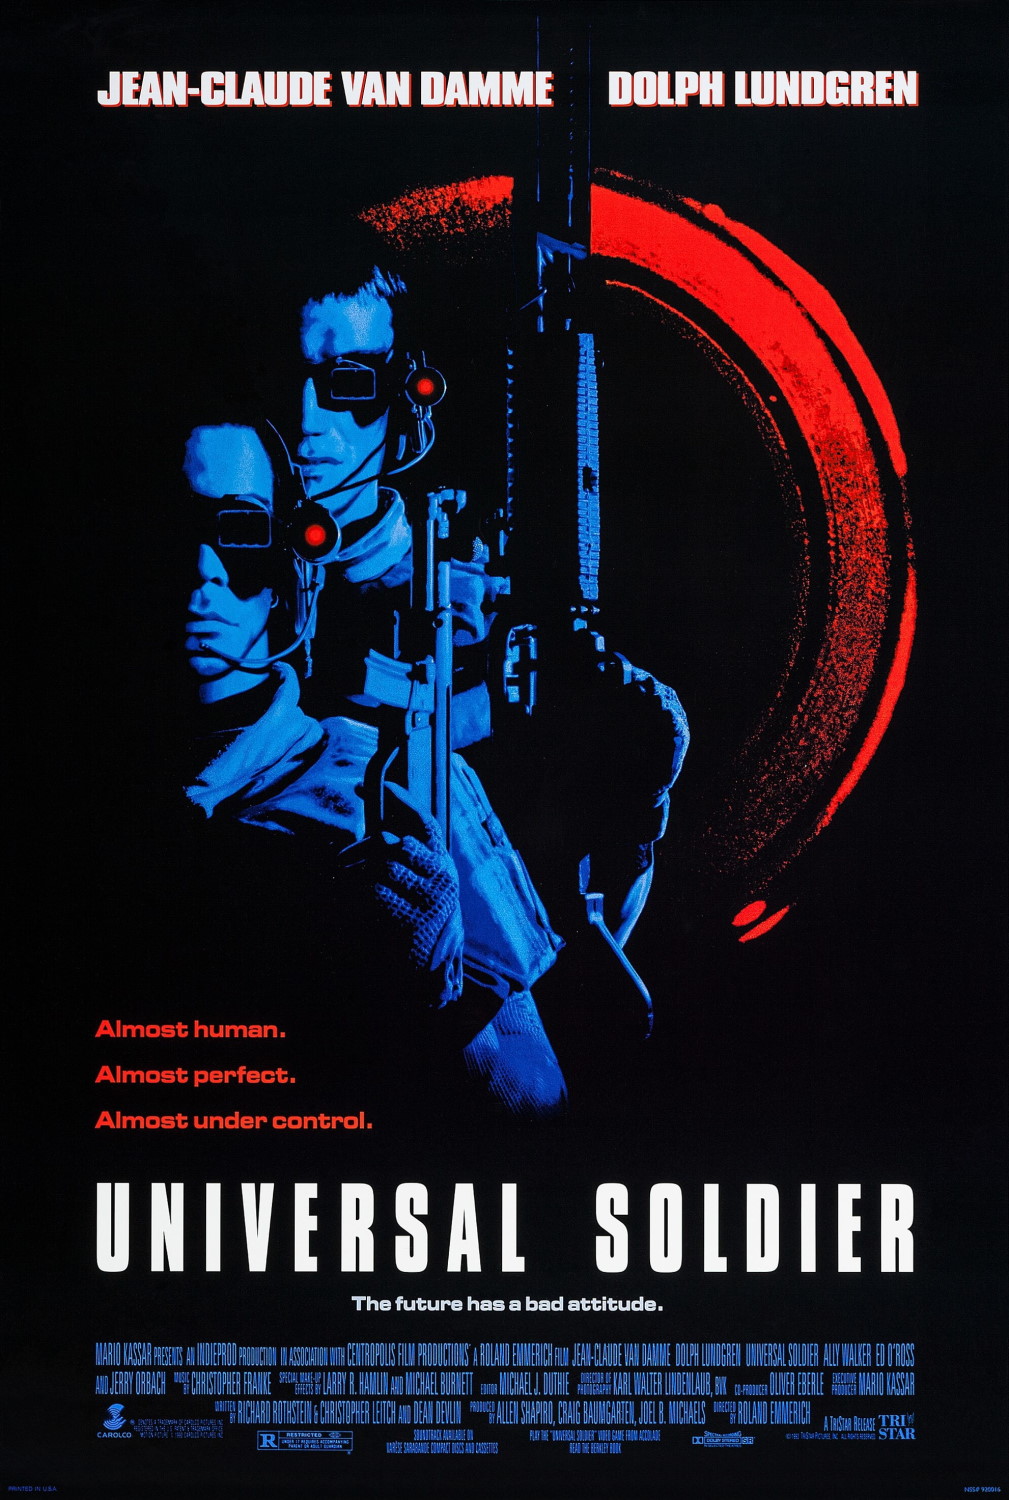 Poster for Universal Soldier (1992)